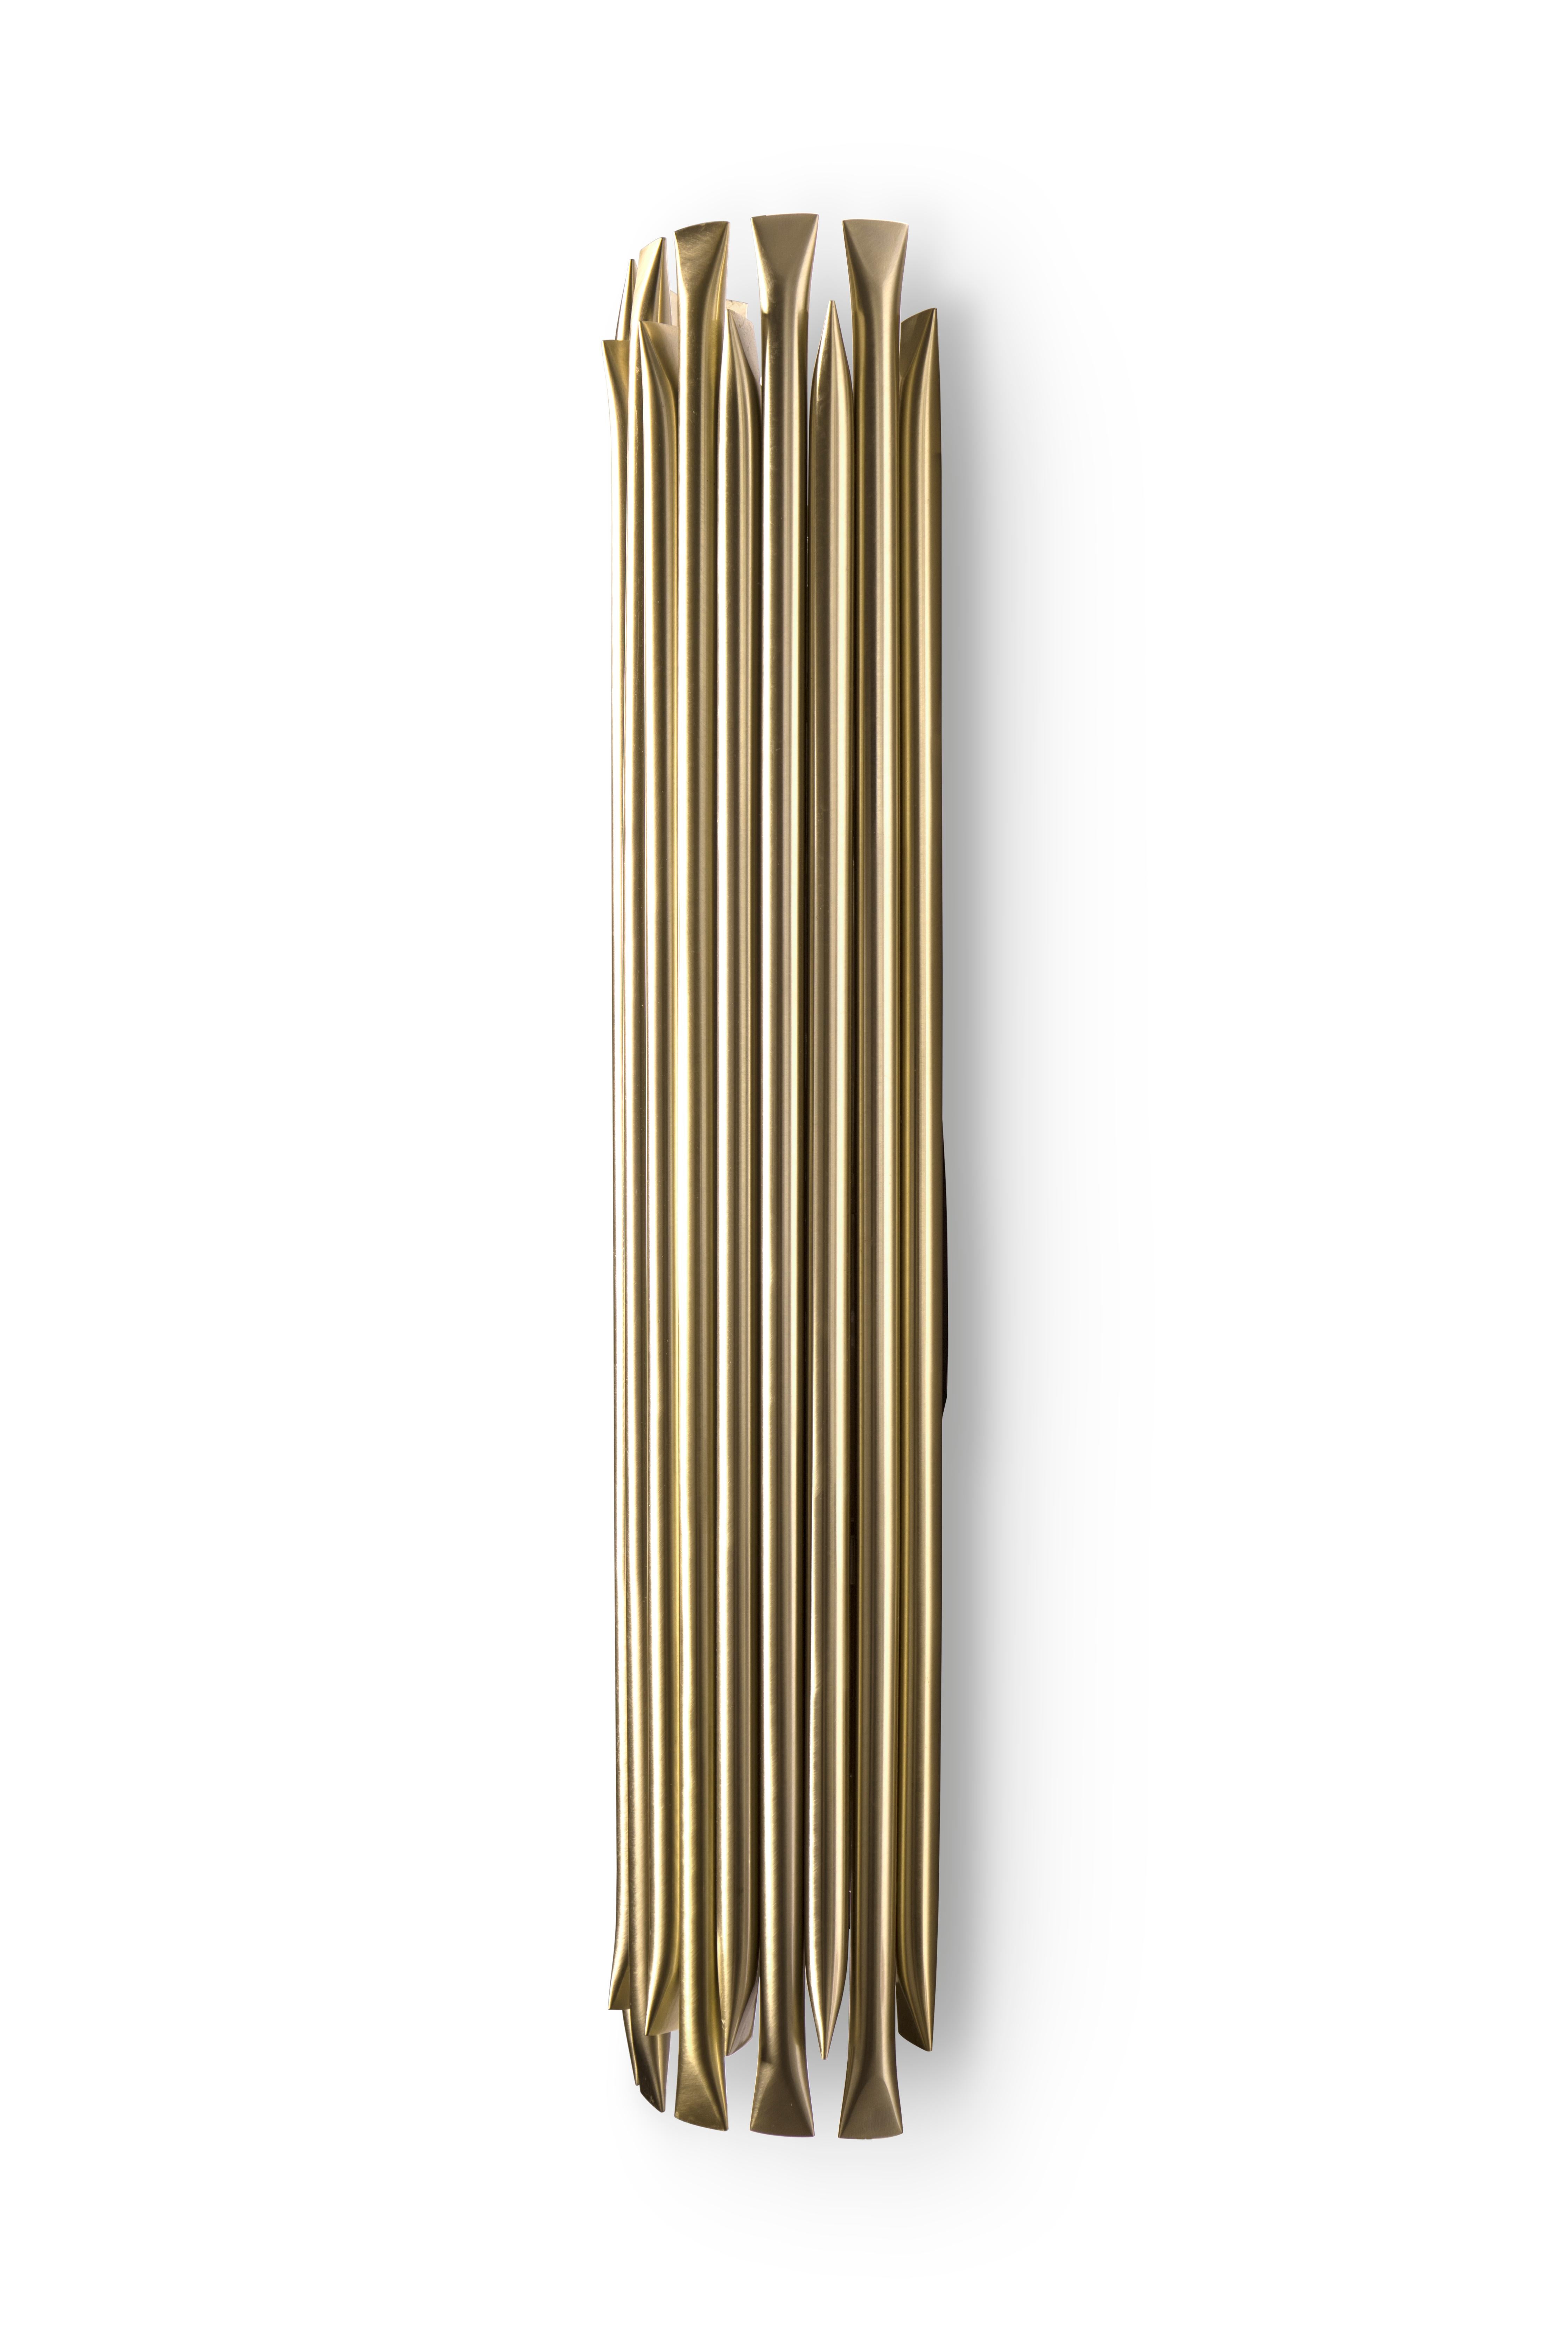 Mid-Century Modern Matheny Large Wall Light in Brass with Brushed Nickel Finish For Sale